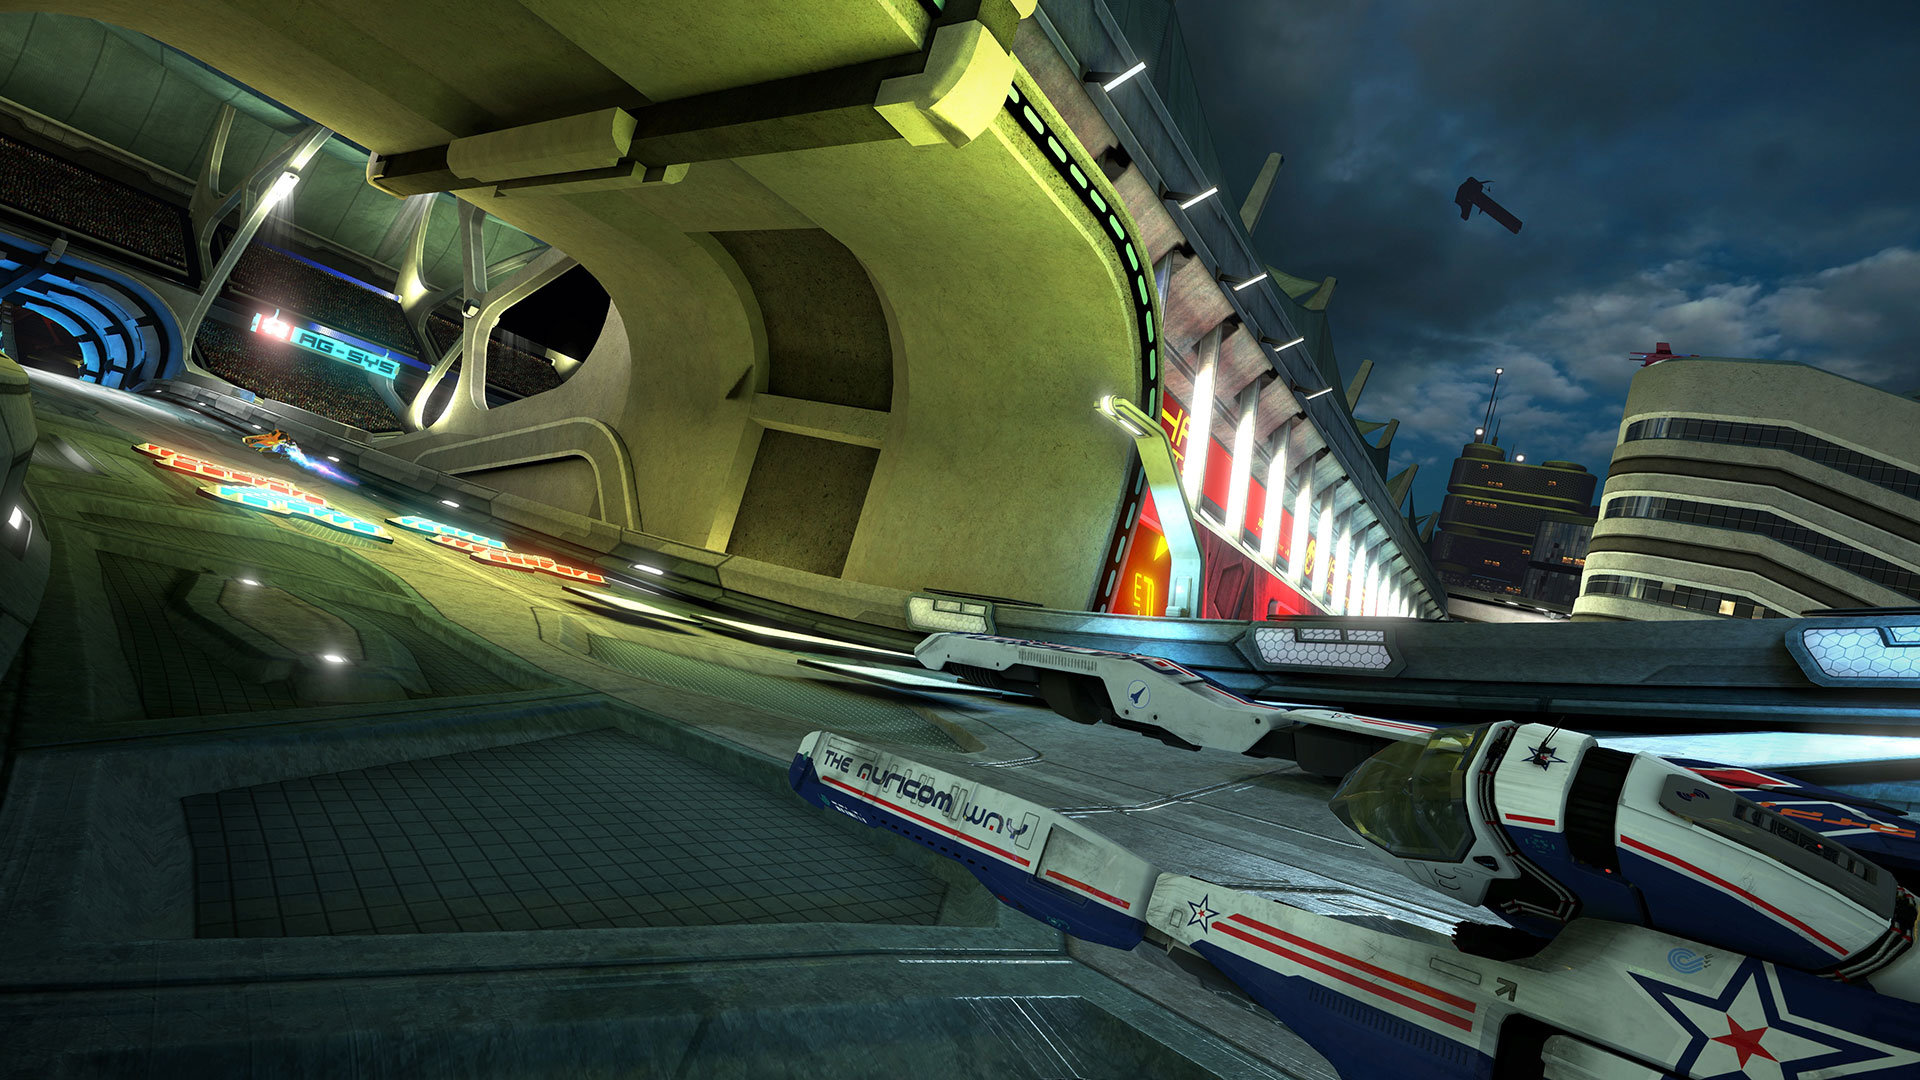 Media asset in full size related to 3dfxzone.it news item entitled as follows: Wipeout Omega Collection: Sony pubblica trailer, screenshots e data di lancio | Image Name: news26090_Wipeout-Omega-Collection_6.jpg